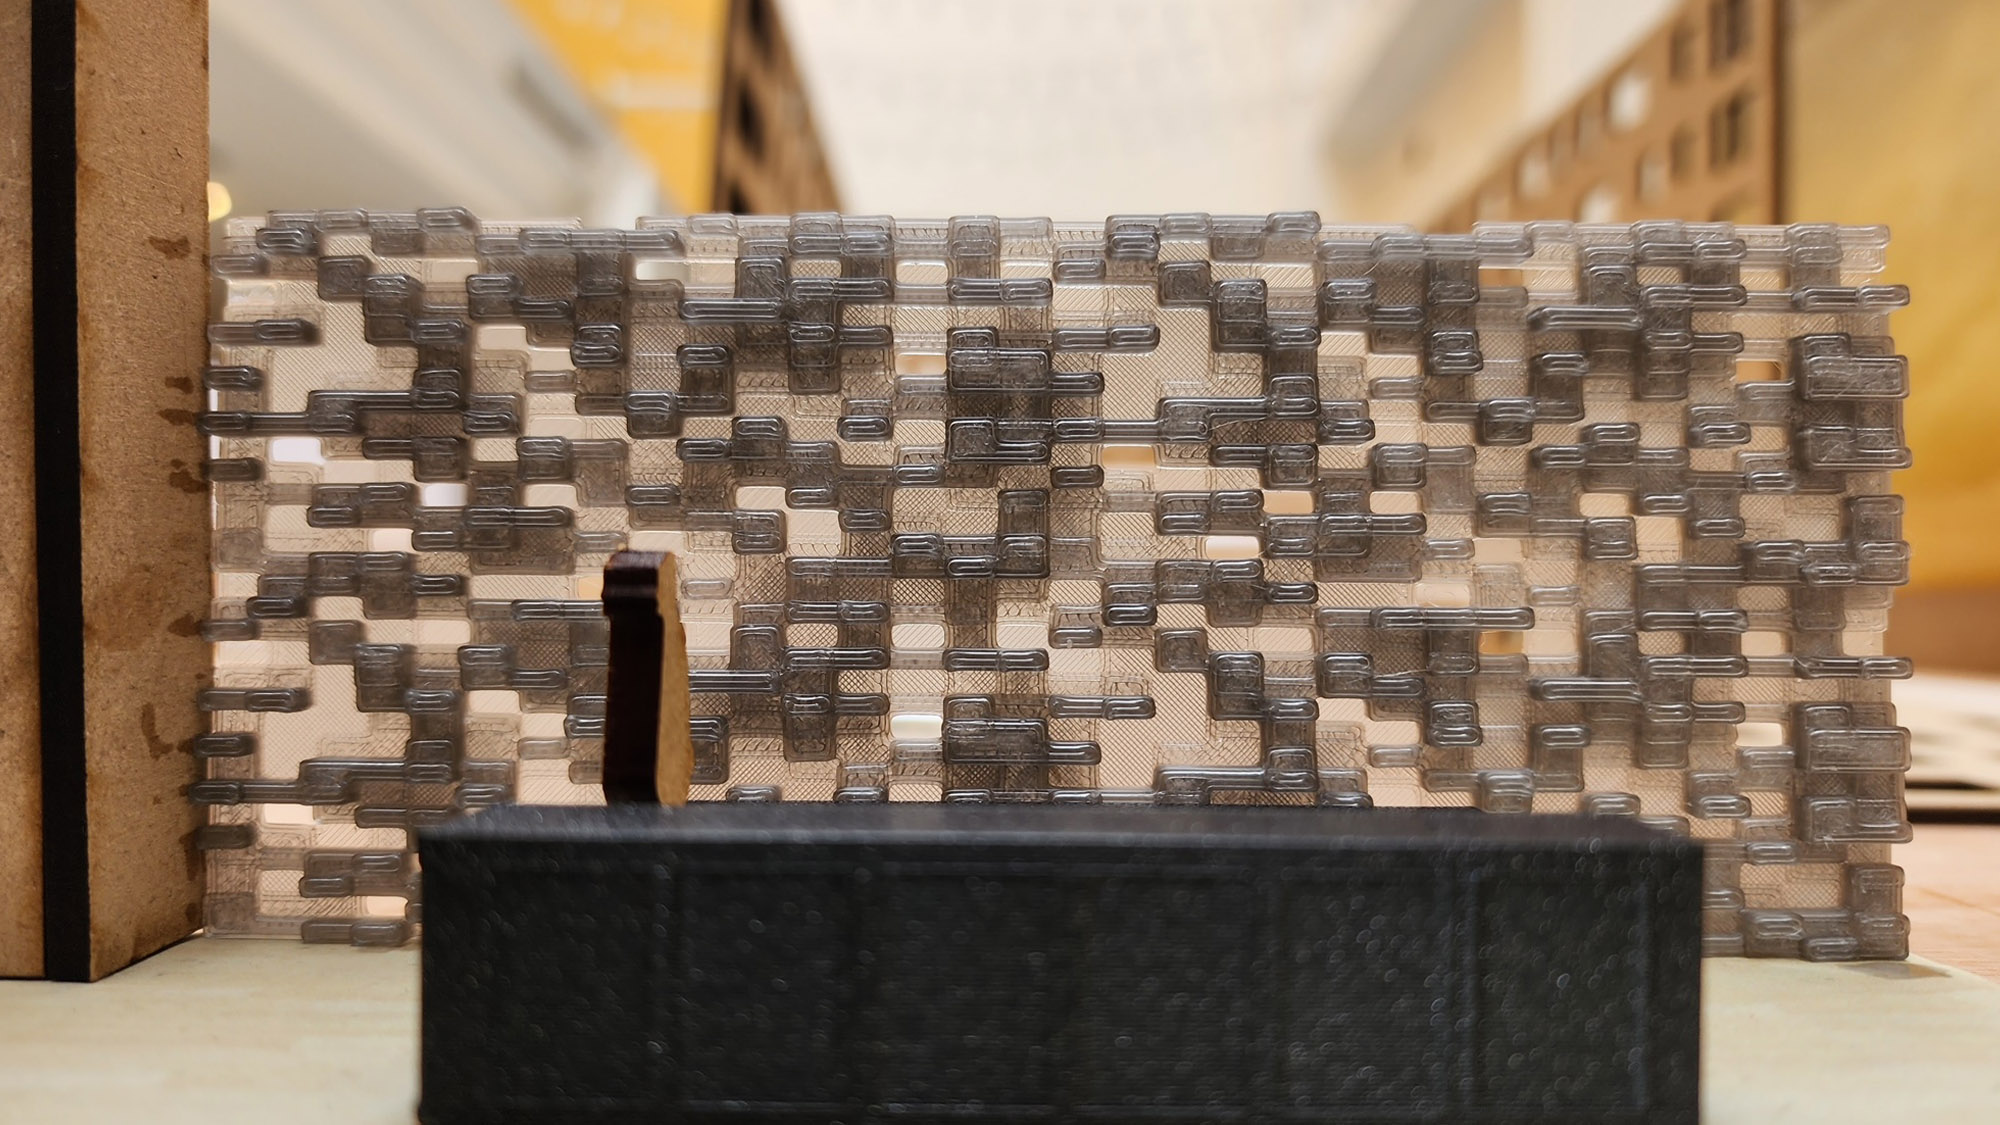 Close up of one of the models showing a reception desk in front of an interior brick wall